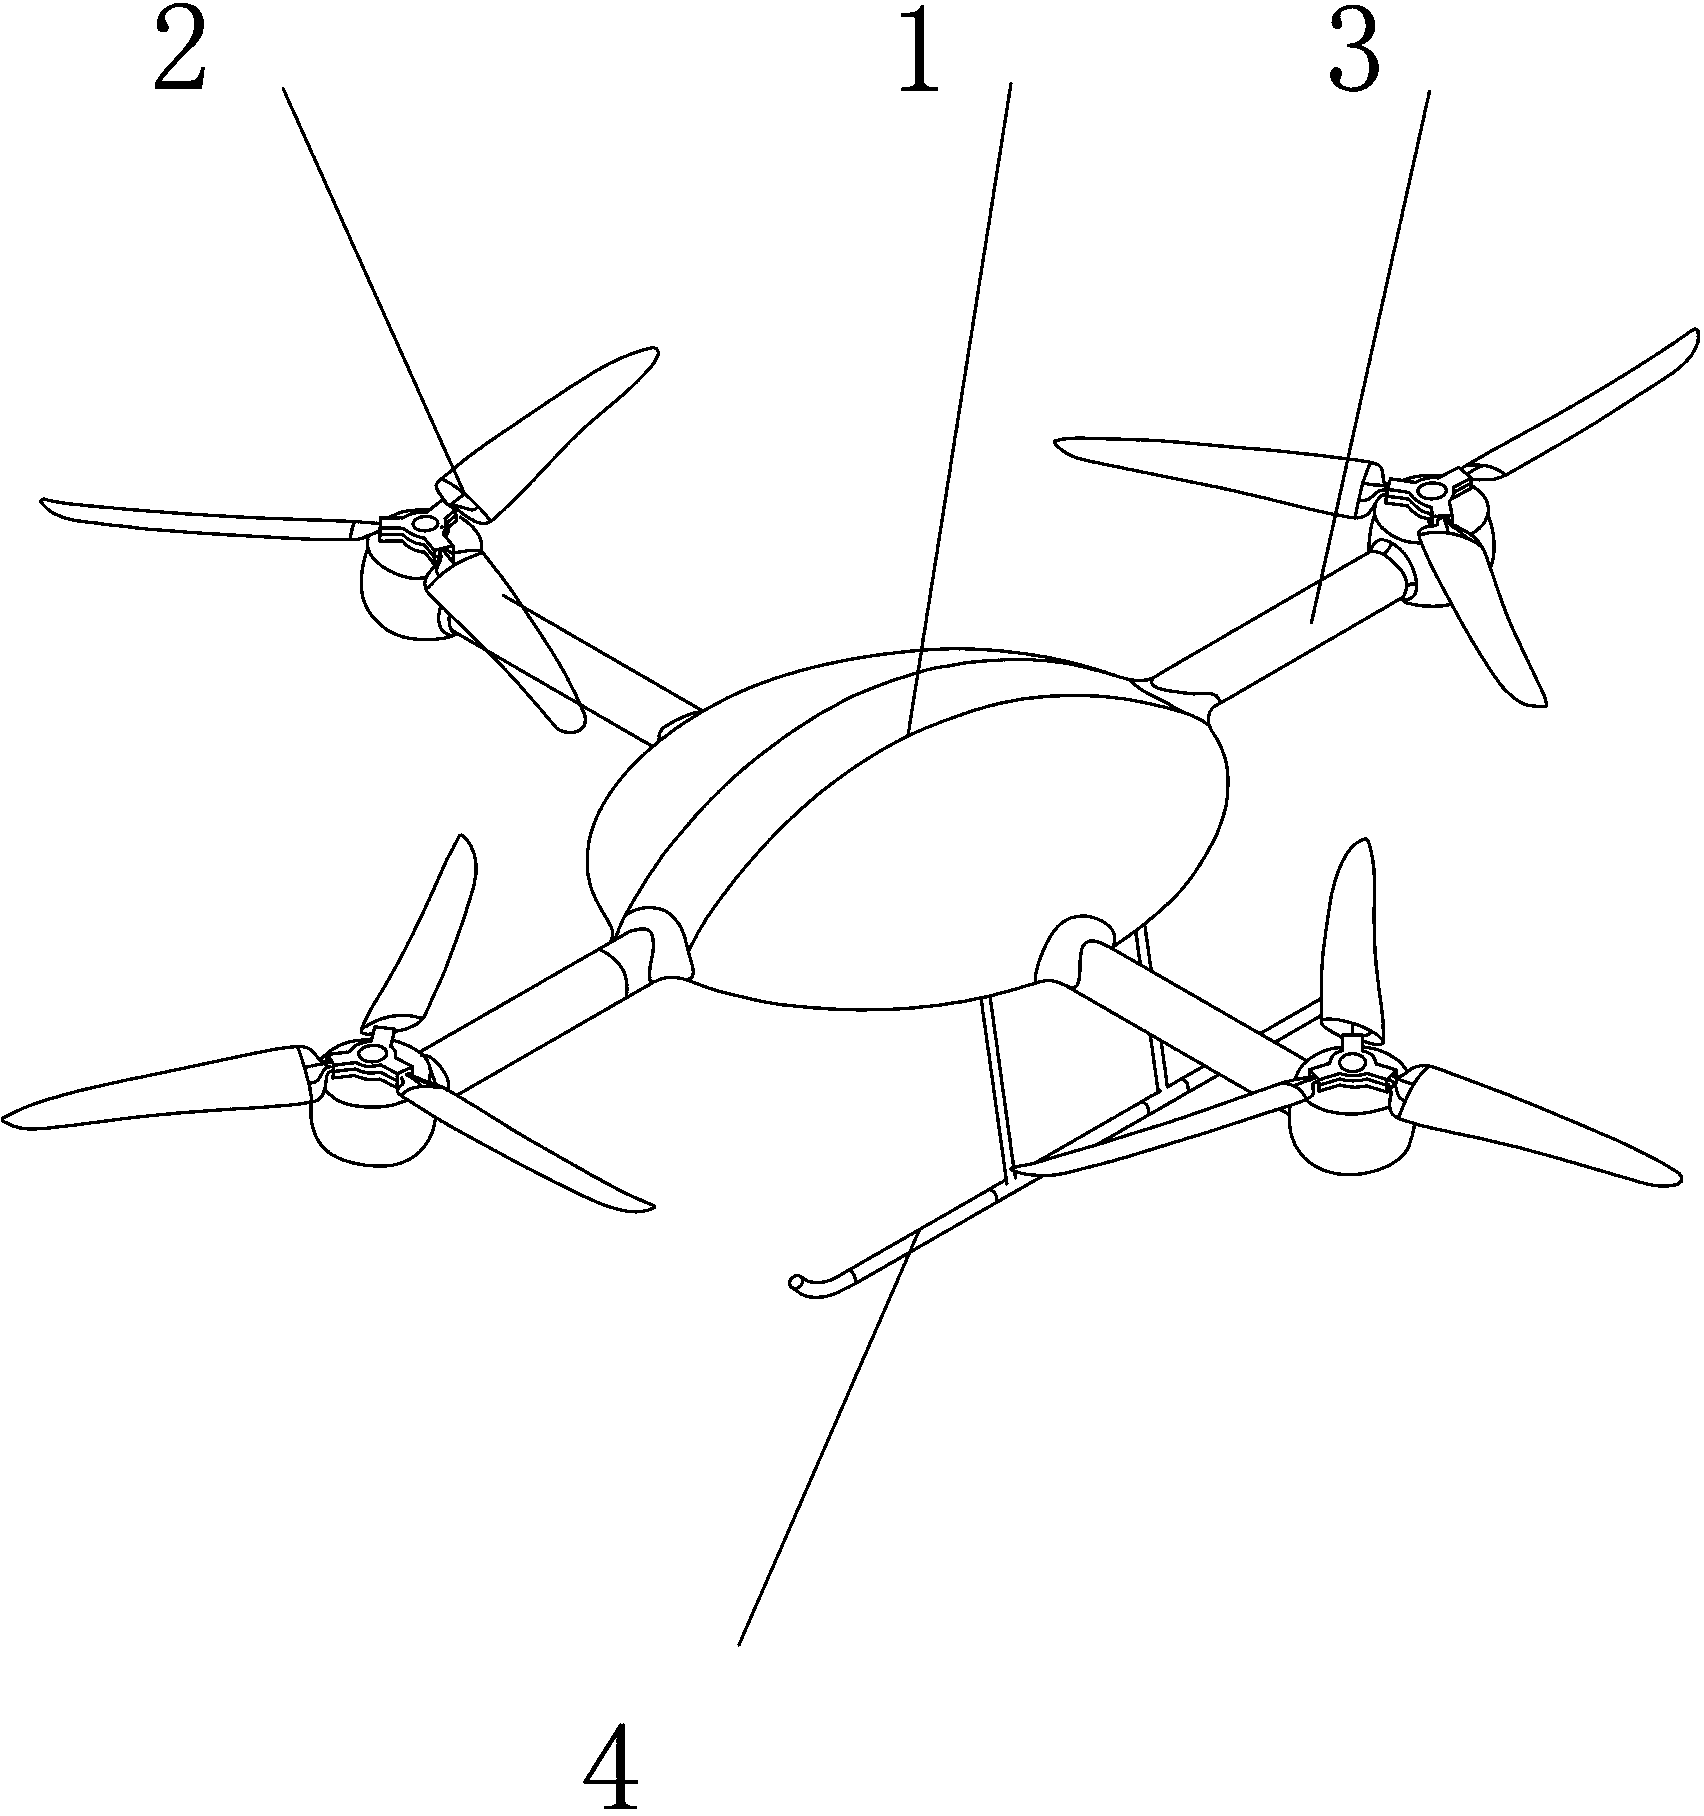 Four-rotor wing unmanned aerial vehicle with pneumatic structure